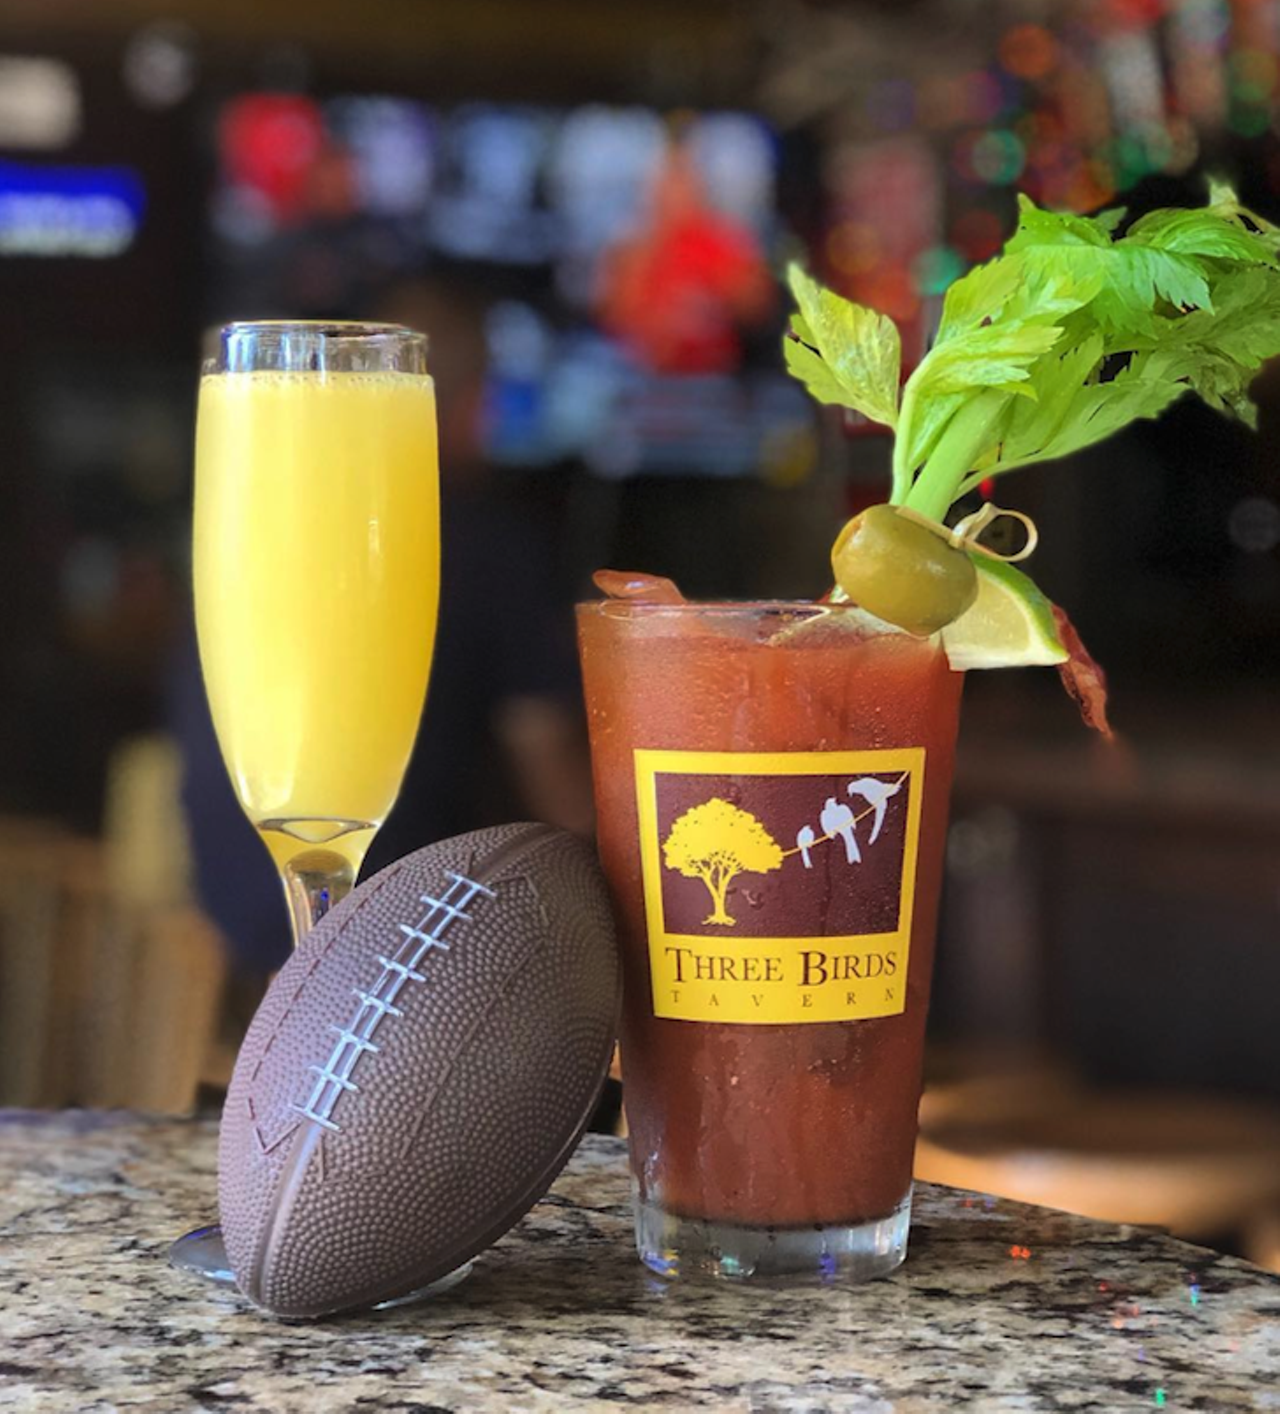 Three Birds Tavern  
1492 4th St. N., St. Pete 727-895-2049
Have brunch and then head out to the patio for some big jenga and pool. The full bar will keep your boozy vibes going.
Photo via Three Birds Tavern/Facebook